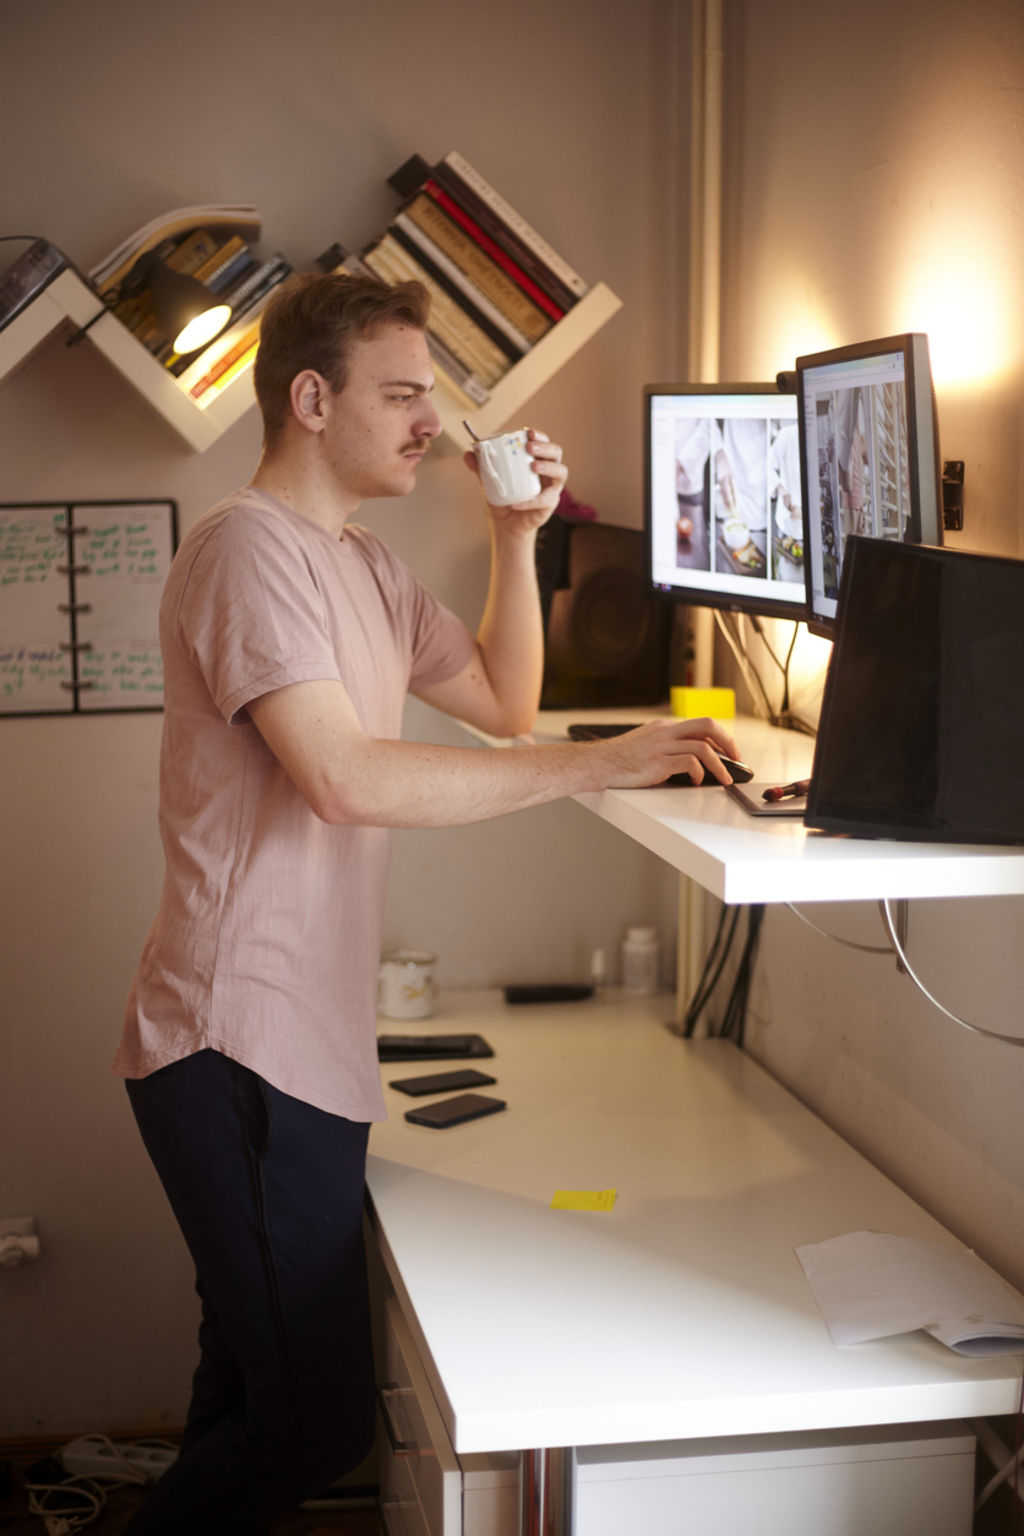 A dedicated workspace with a sit-stand option can make working from home less stressful. Photo: iStock